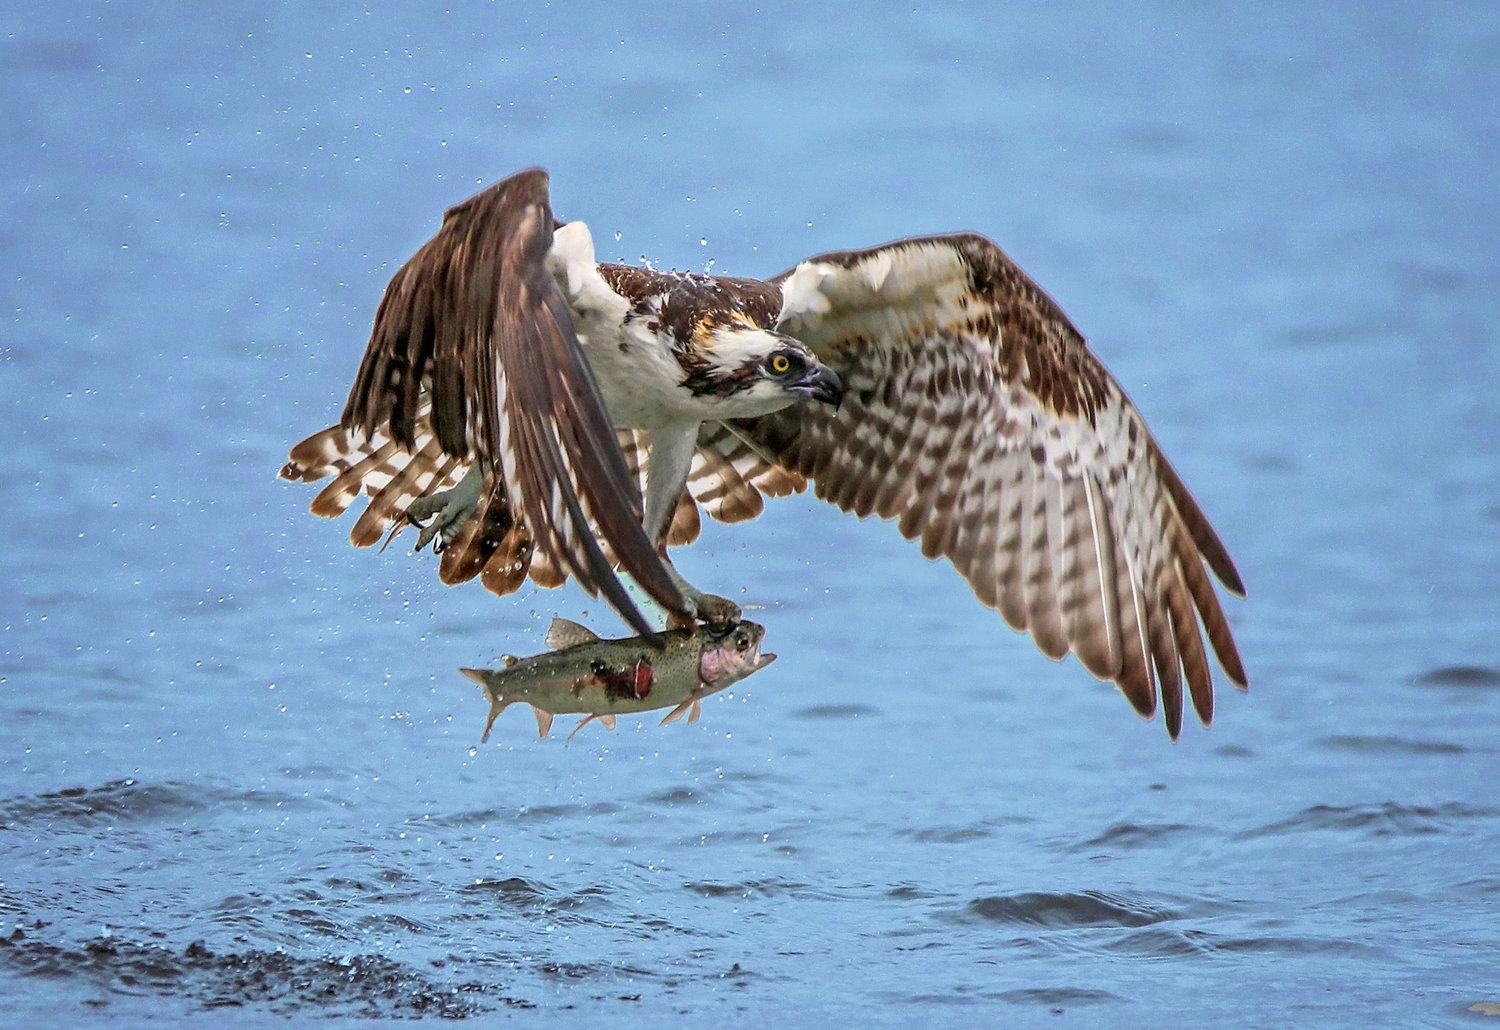 A hungry osprey is shown bringing home dinner.